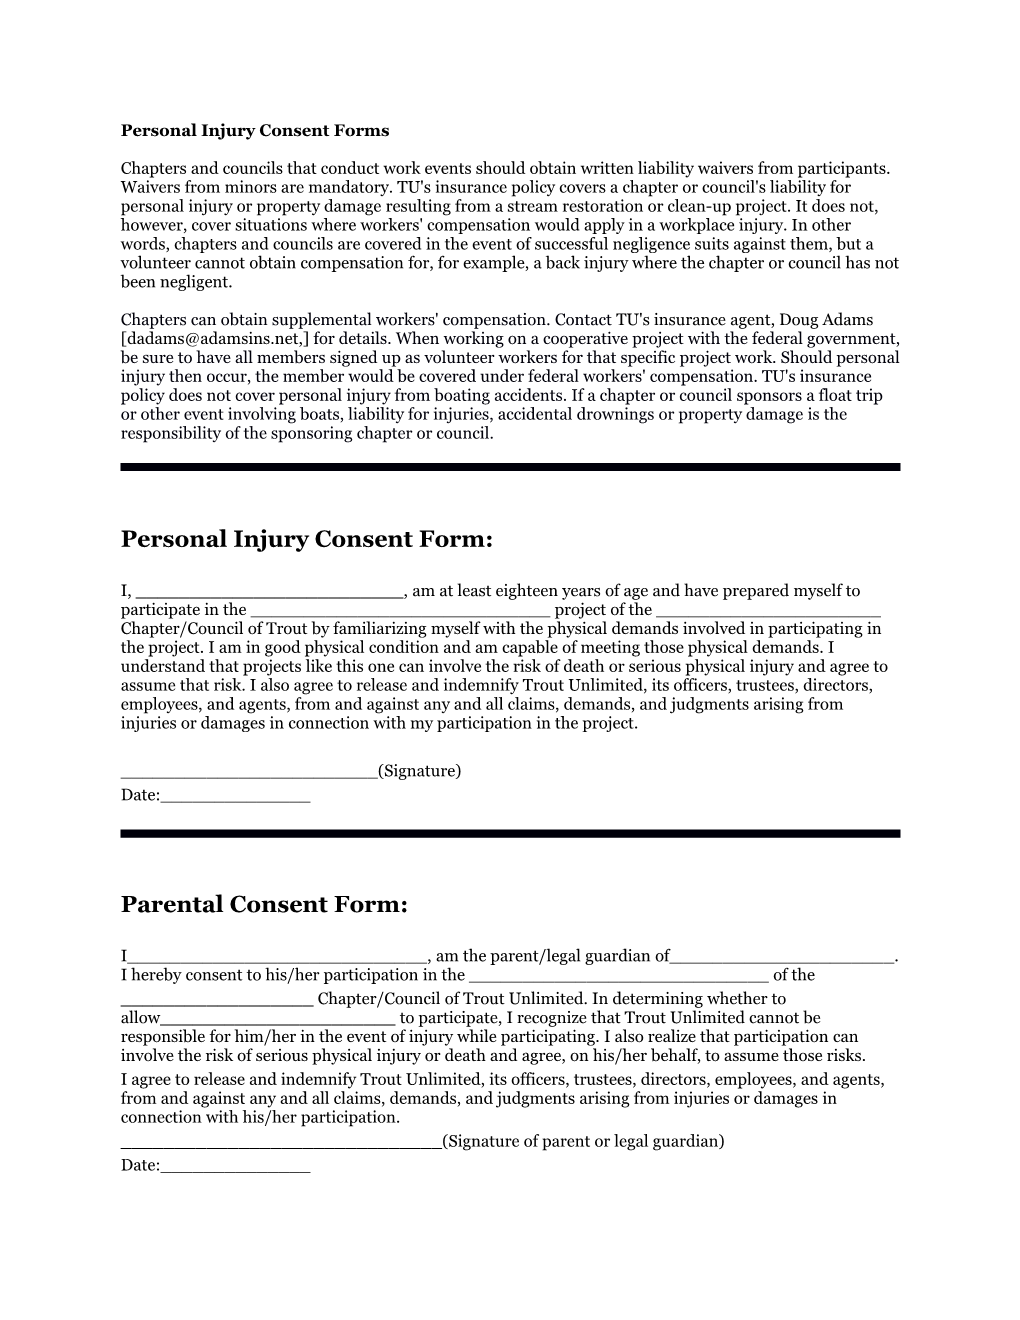 Personal Injury Consent Forms